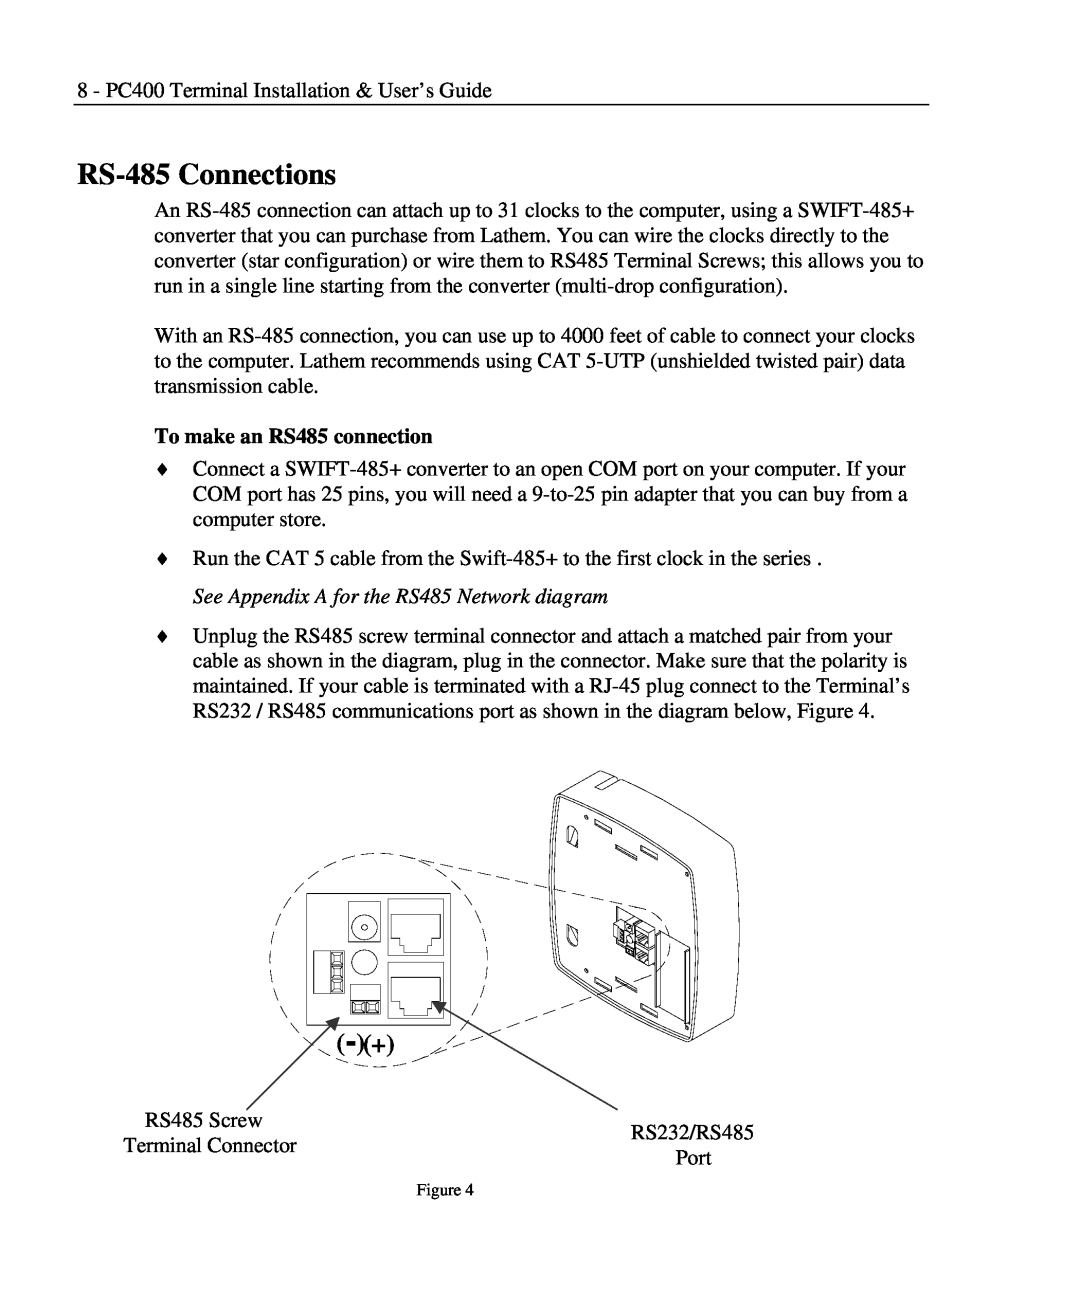 Lathem PC400TX manual RS-485 Connections, To make an RS485 connection 